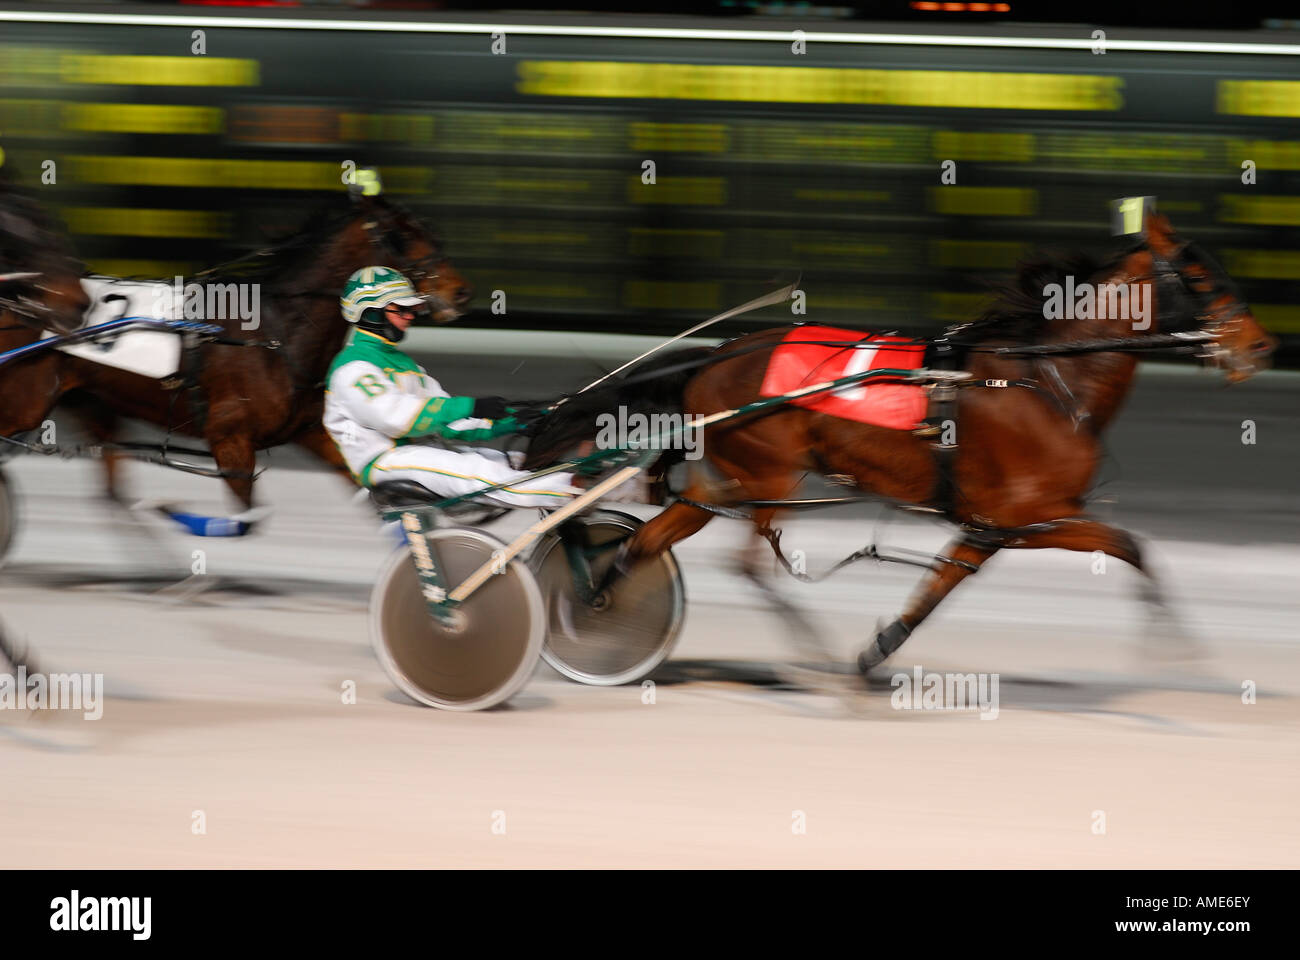 Number one harness racer breaks away at finish line to win at night in winter Ontario Stock Photo